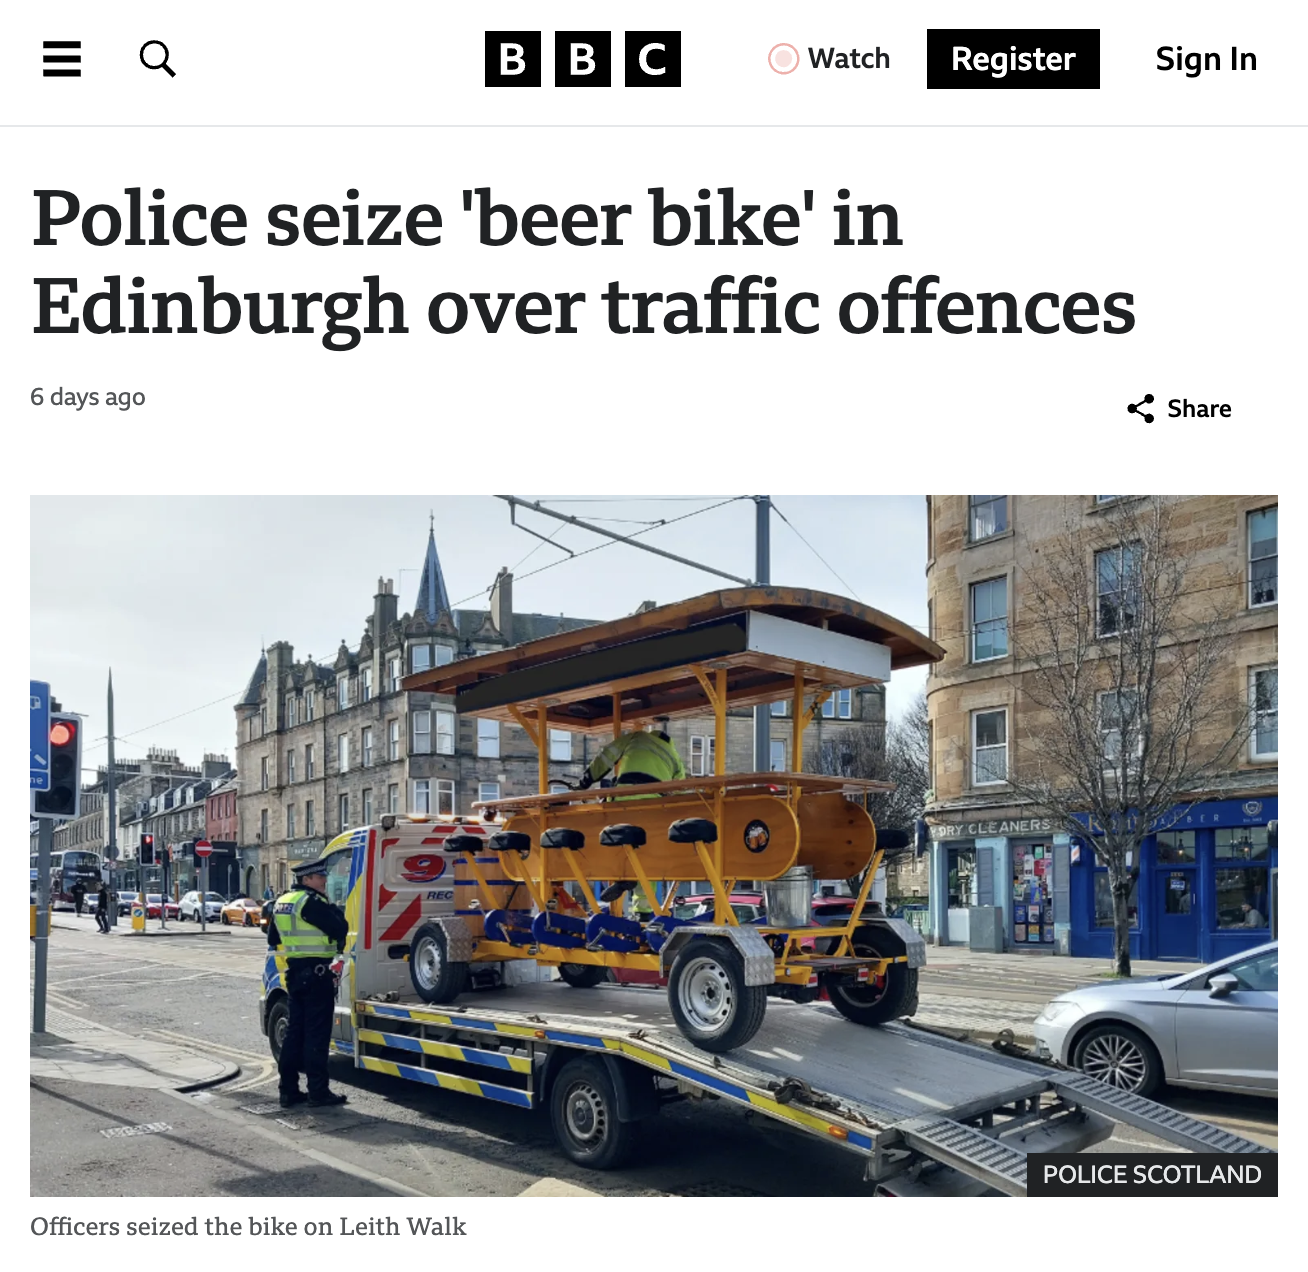 vehicle - Bbc Watch Register Sign In Police seize 'beer bike' in Edinburgh over traffic offences 6 days ago Police Scotland Officers seized the bike on Leith Walk